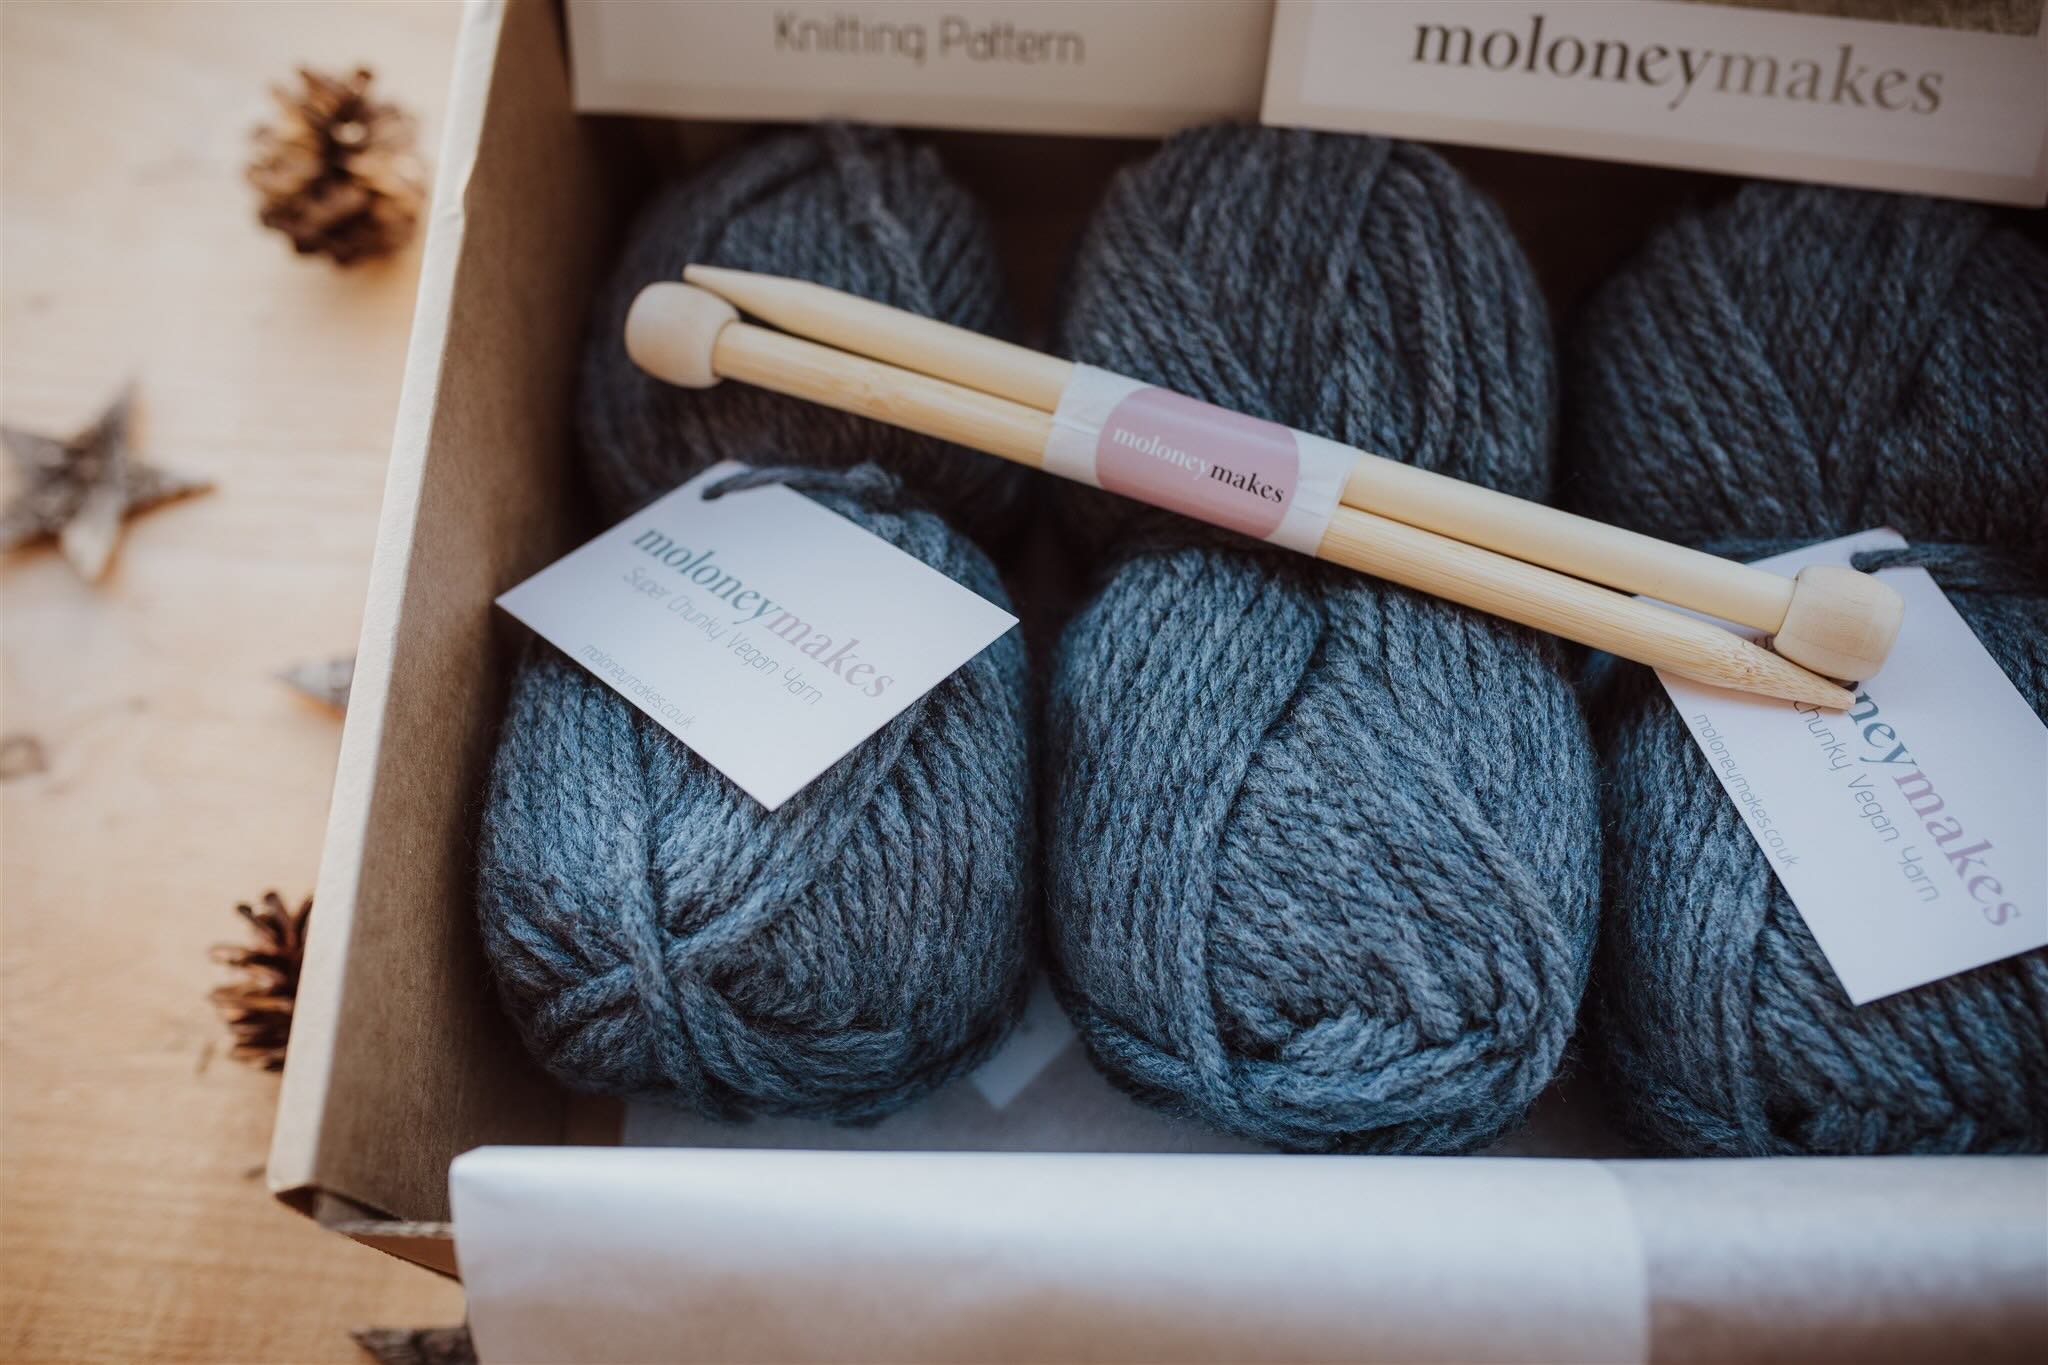 Knitting Kit Review: A Comprehensive Analysis of the Best Options